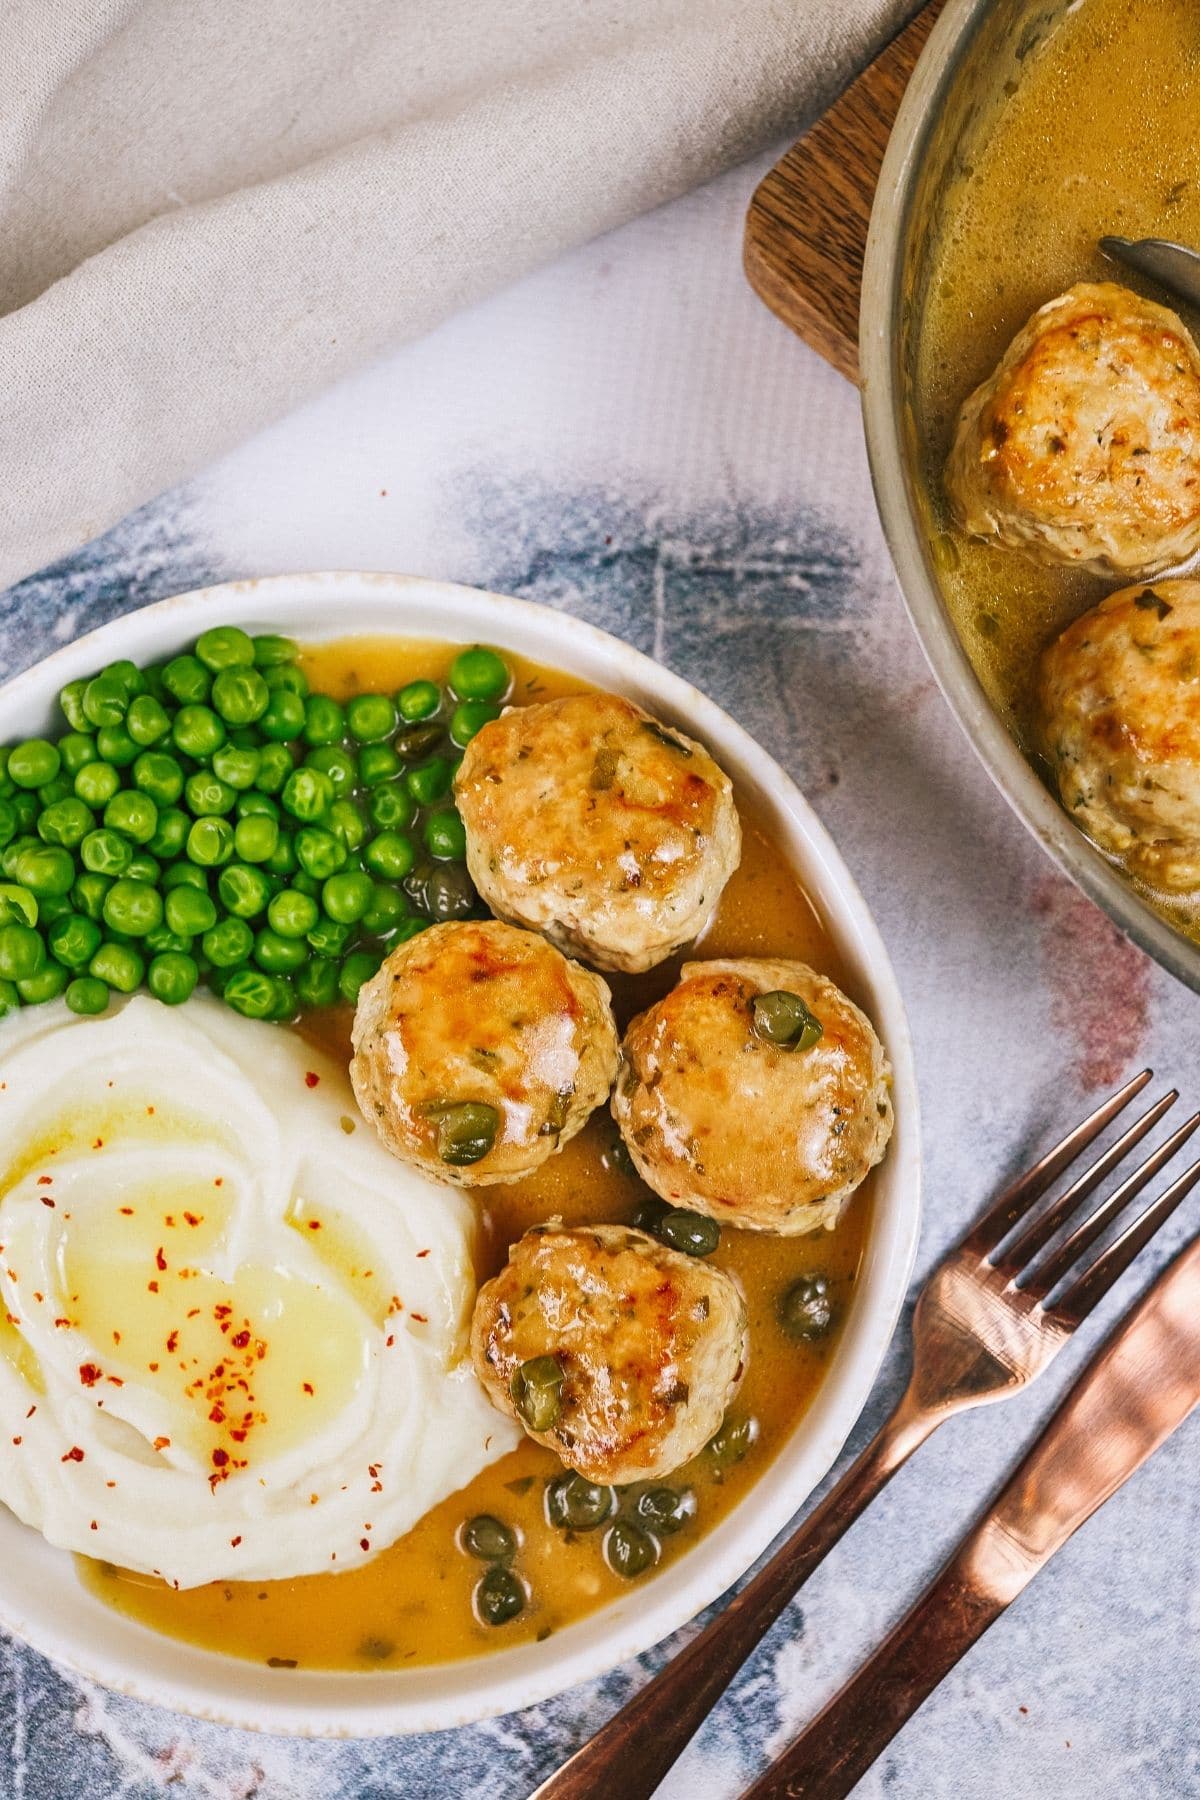 Bowl of meatballs with potatoes and peas next to skillet of chicken piccata meatballs